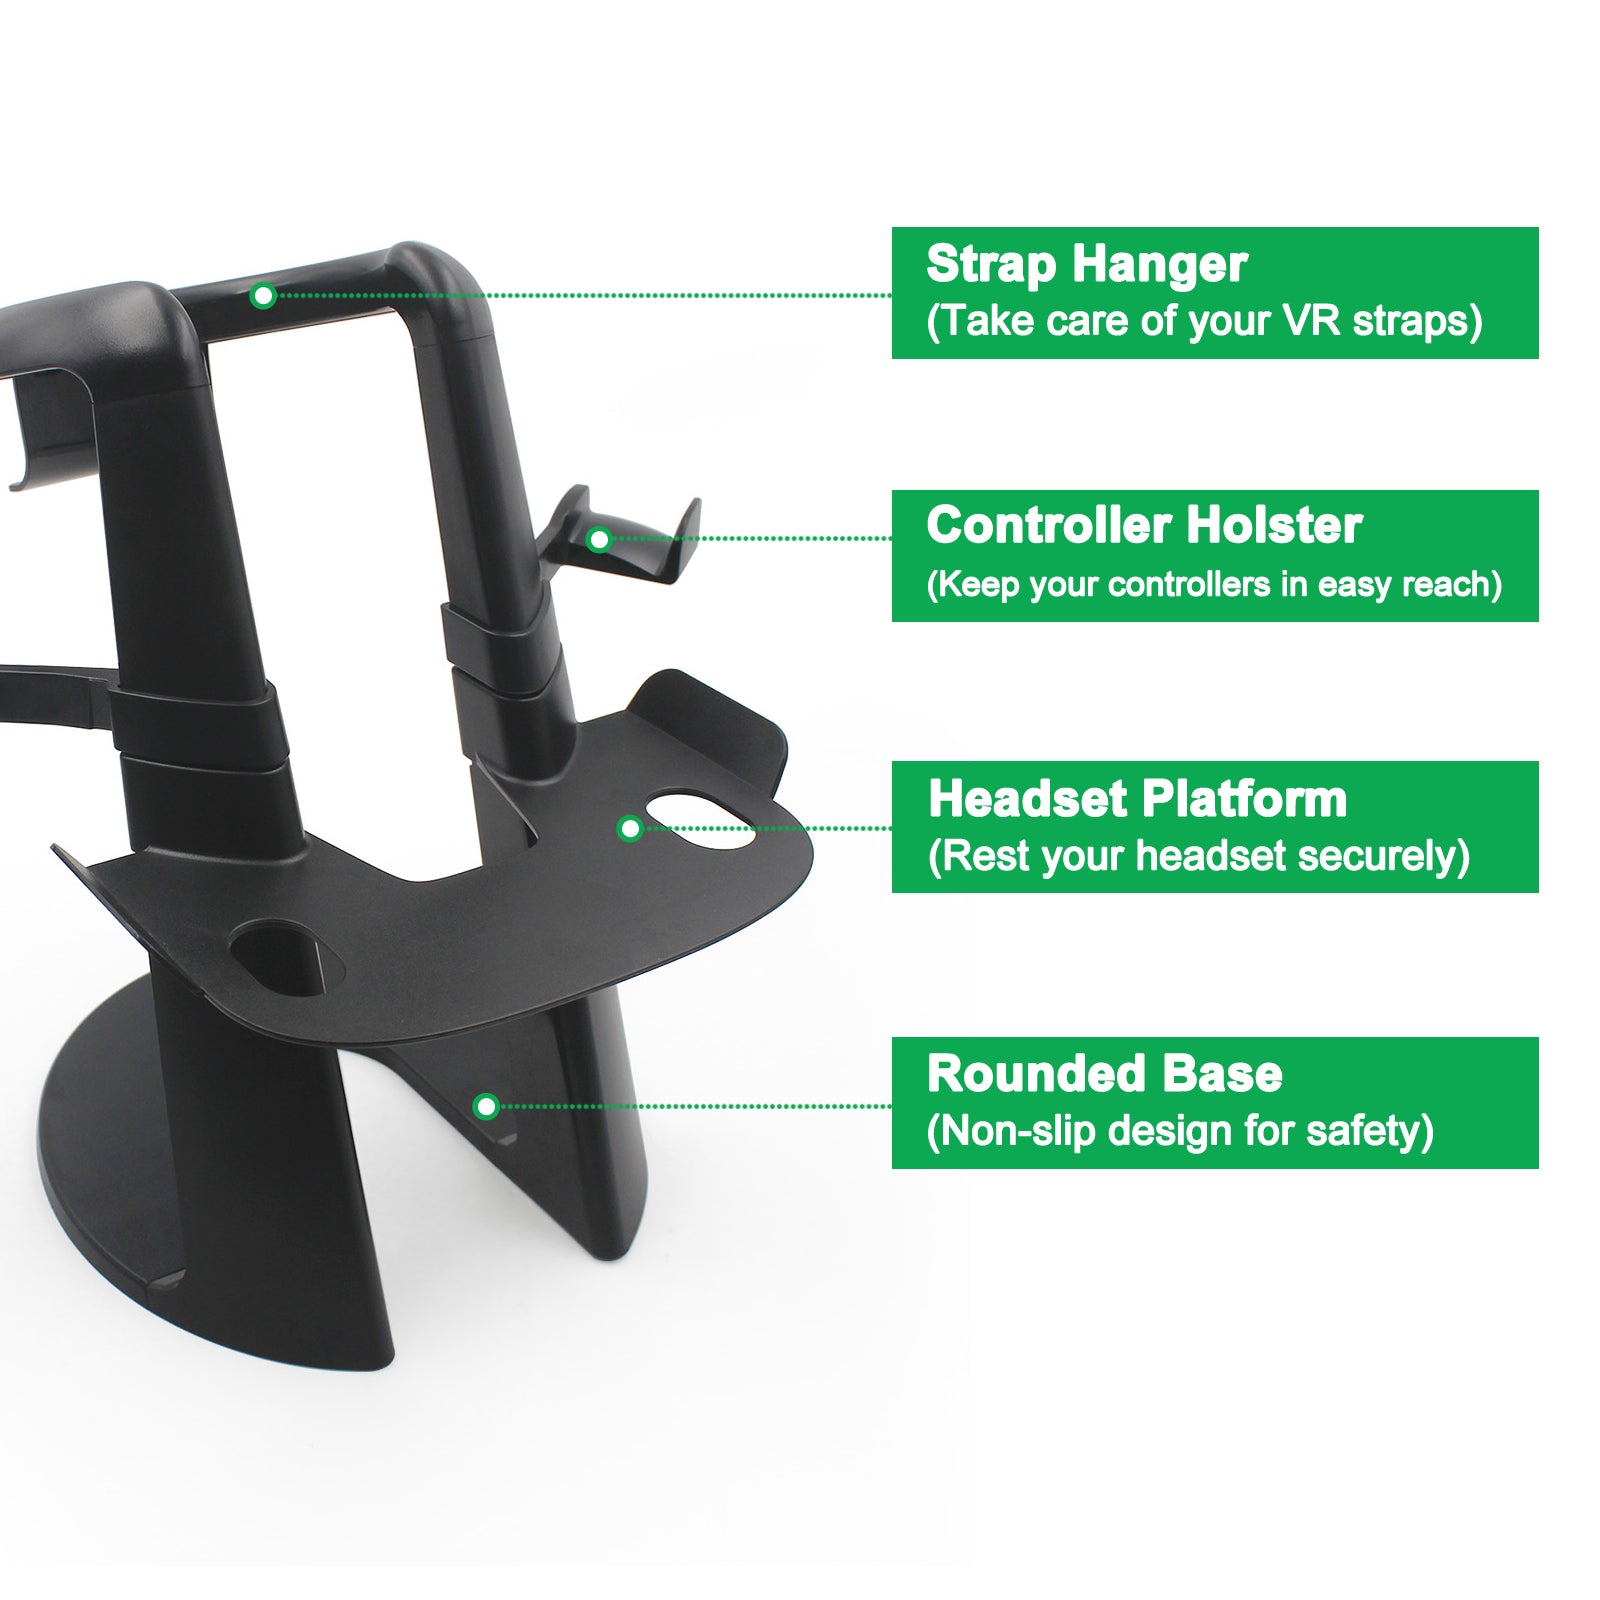 Stand has headband support, VR controller support, head-mounted platform, and circular base.